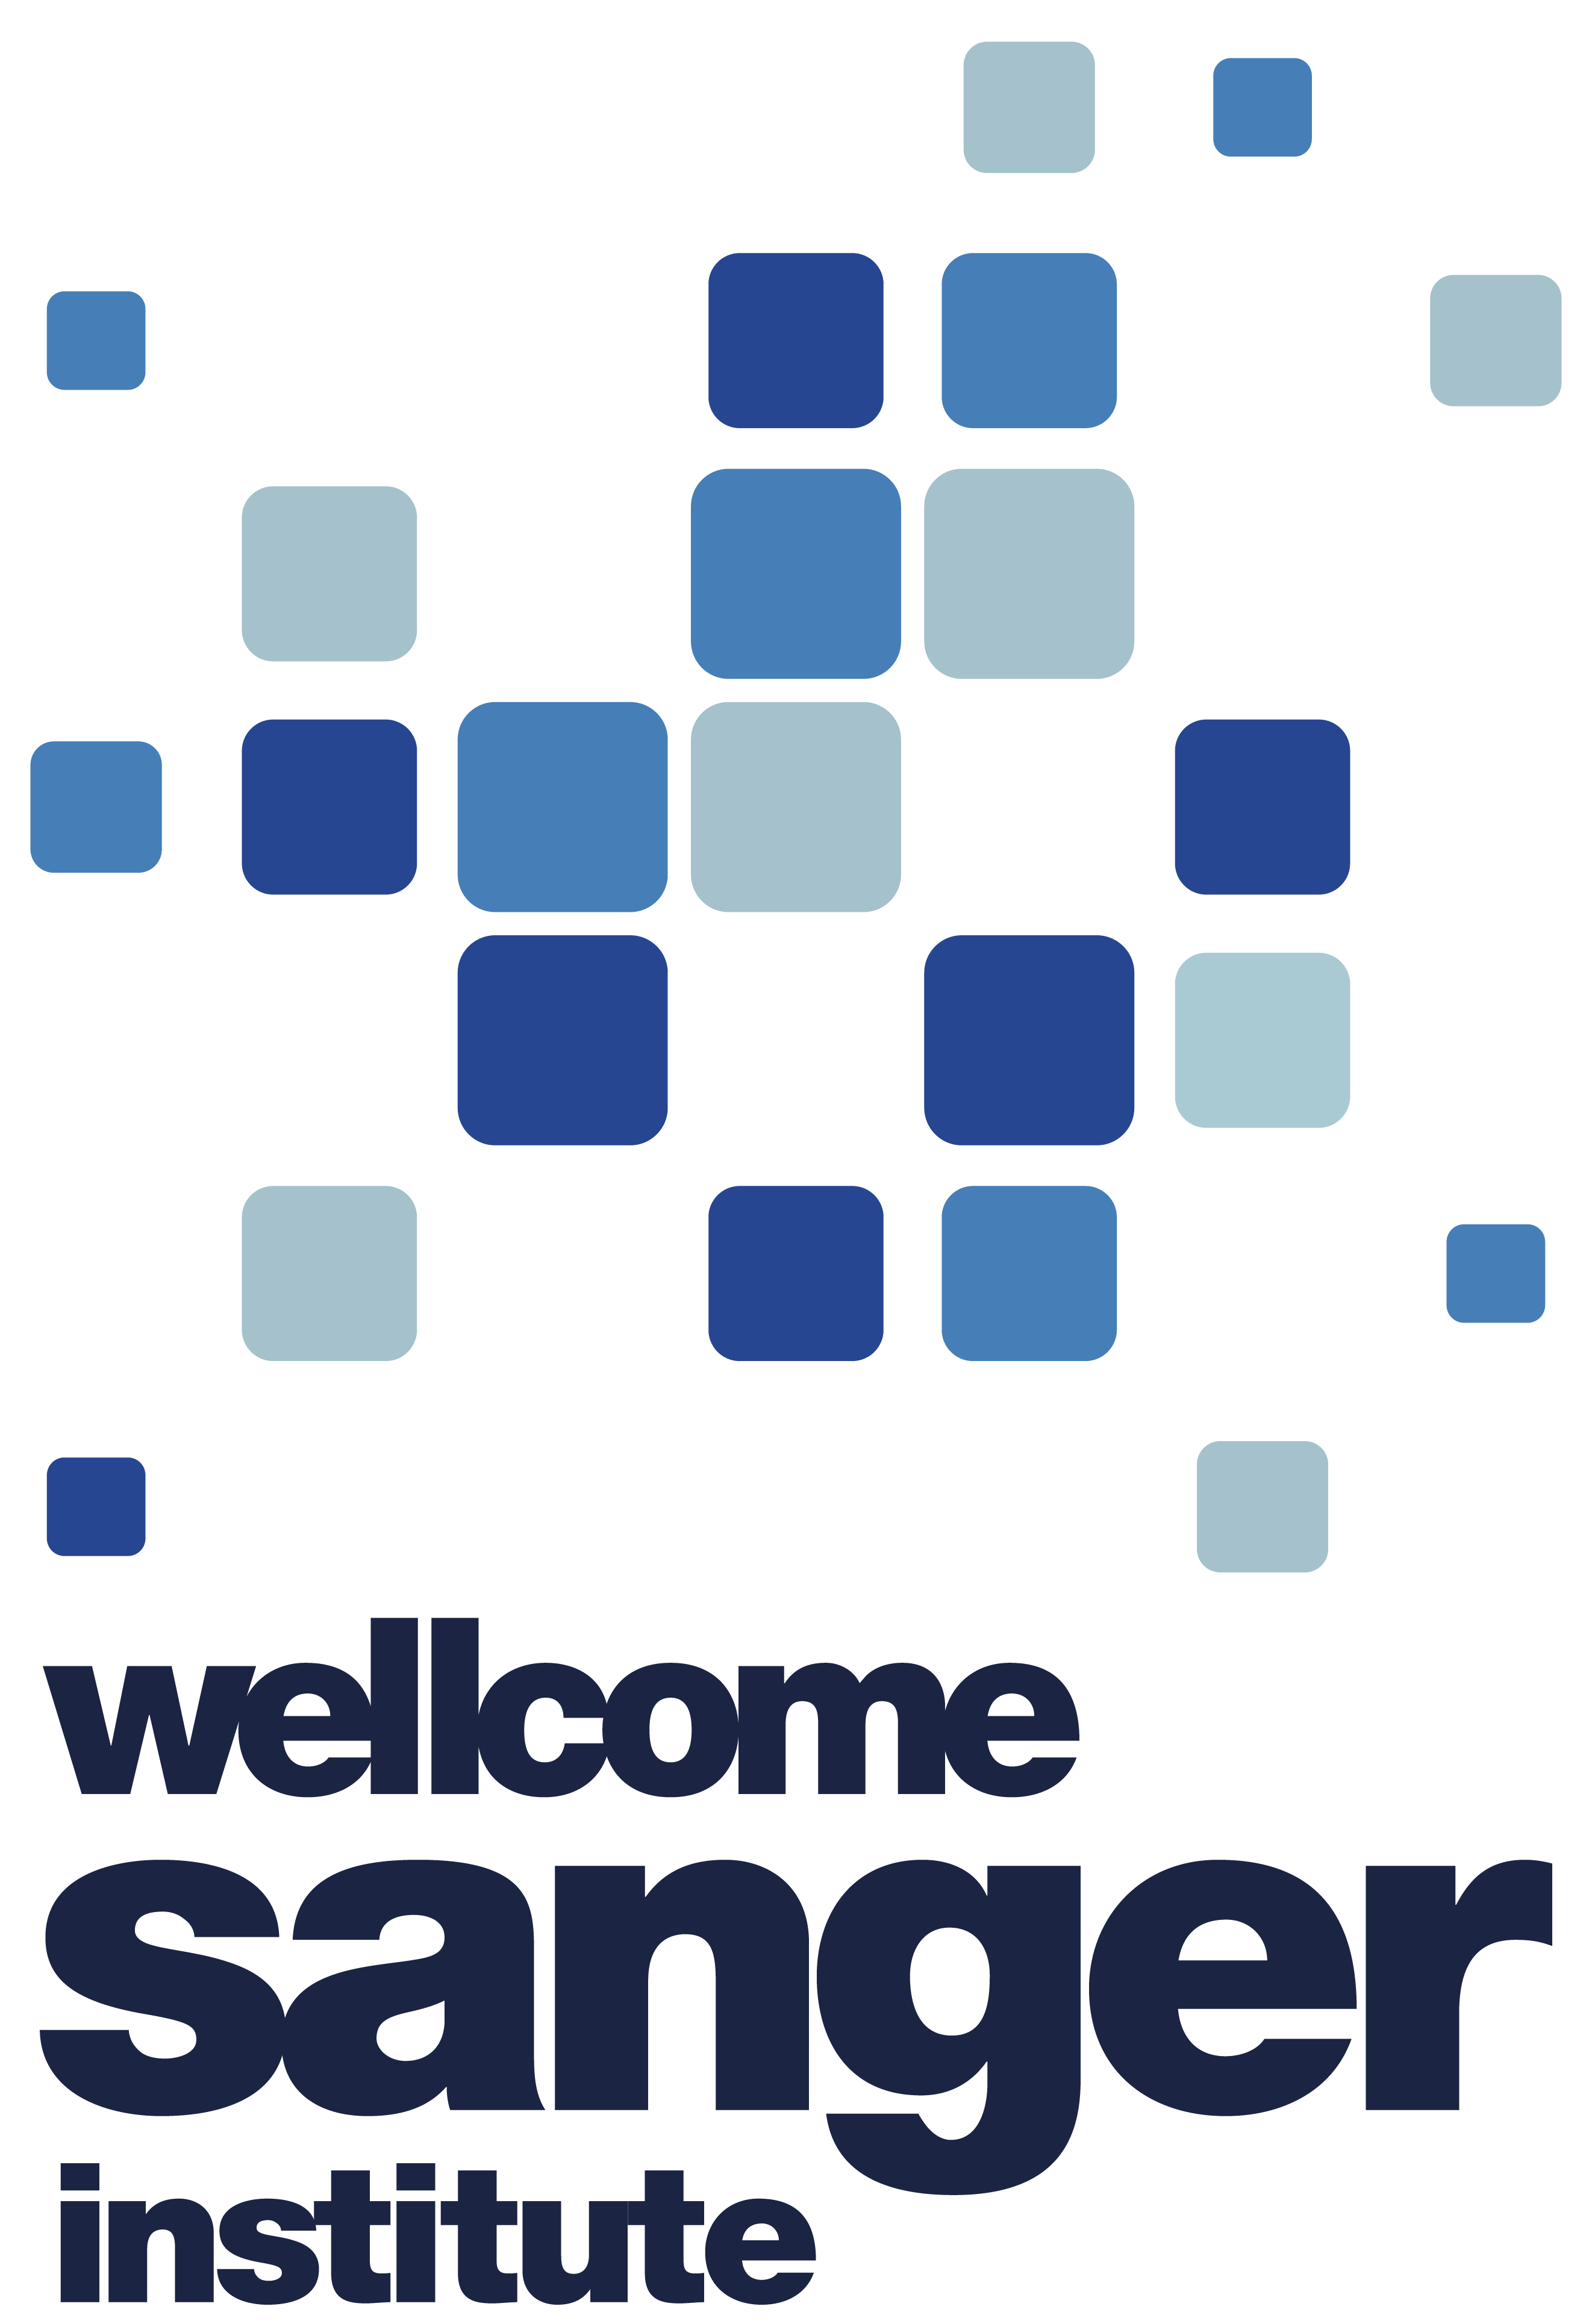 Institute Logo - Wellcome Sanger Institute Branding Guidelines and Logos | Wellcome ...